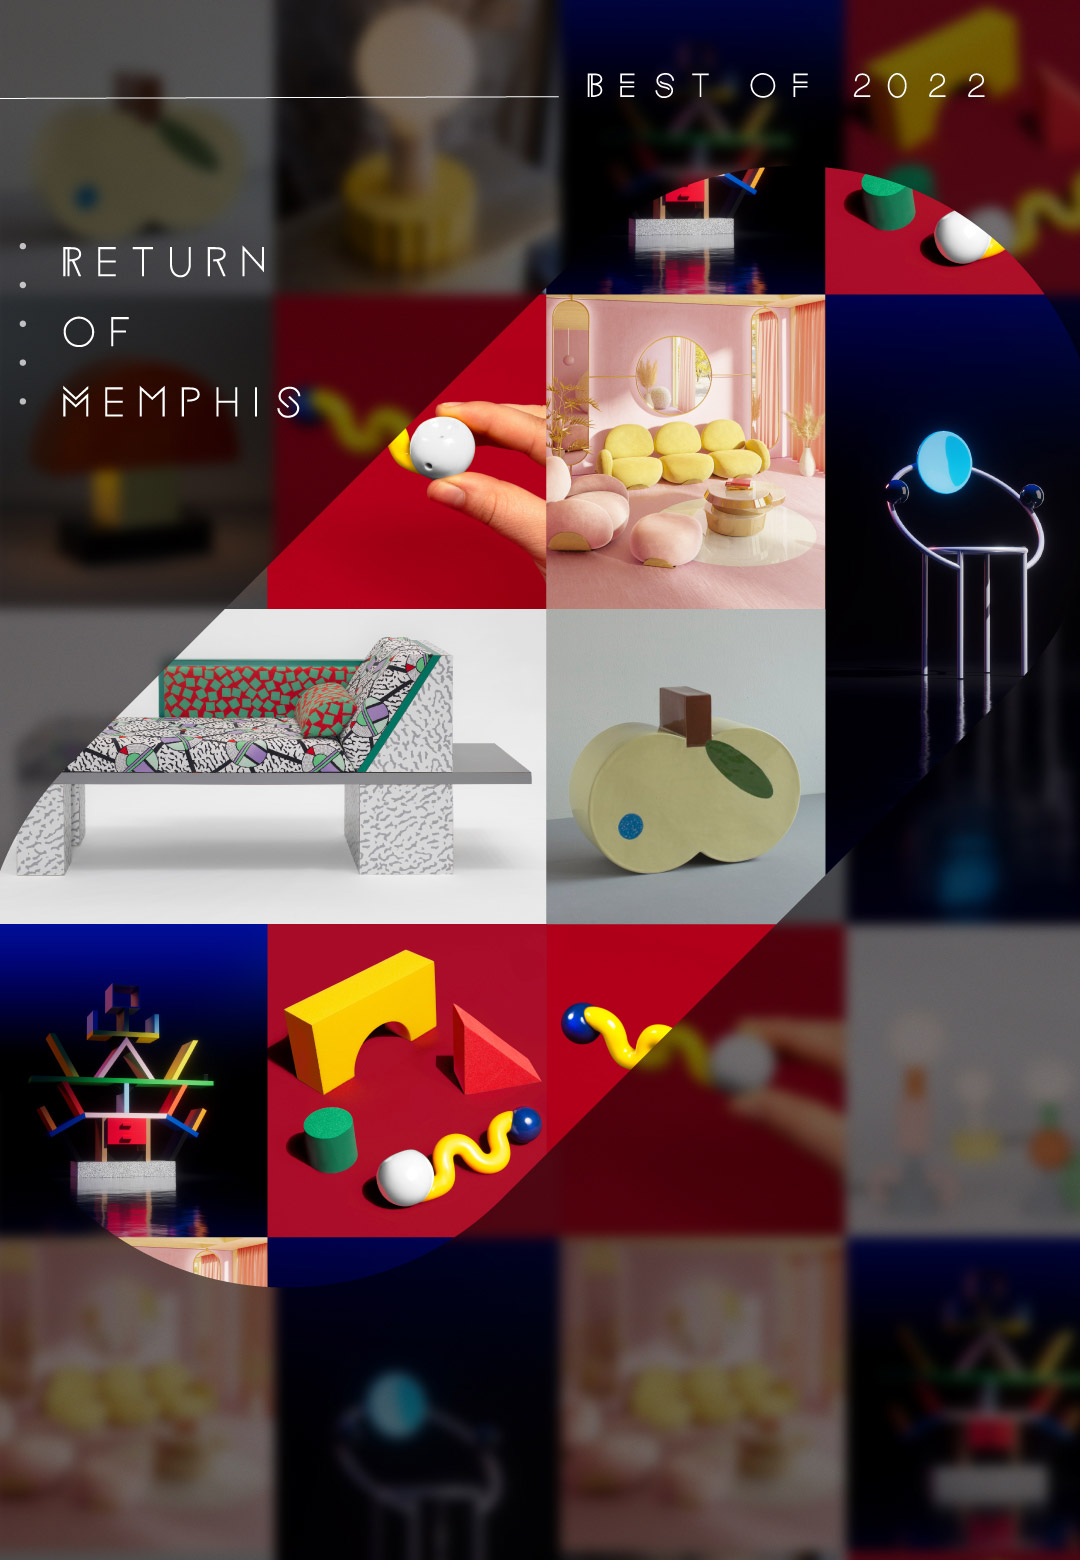 Return of Memphis: How Memphis design style took the centre stage in 2022